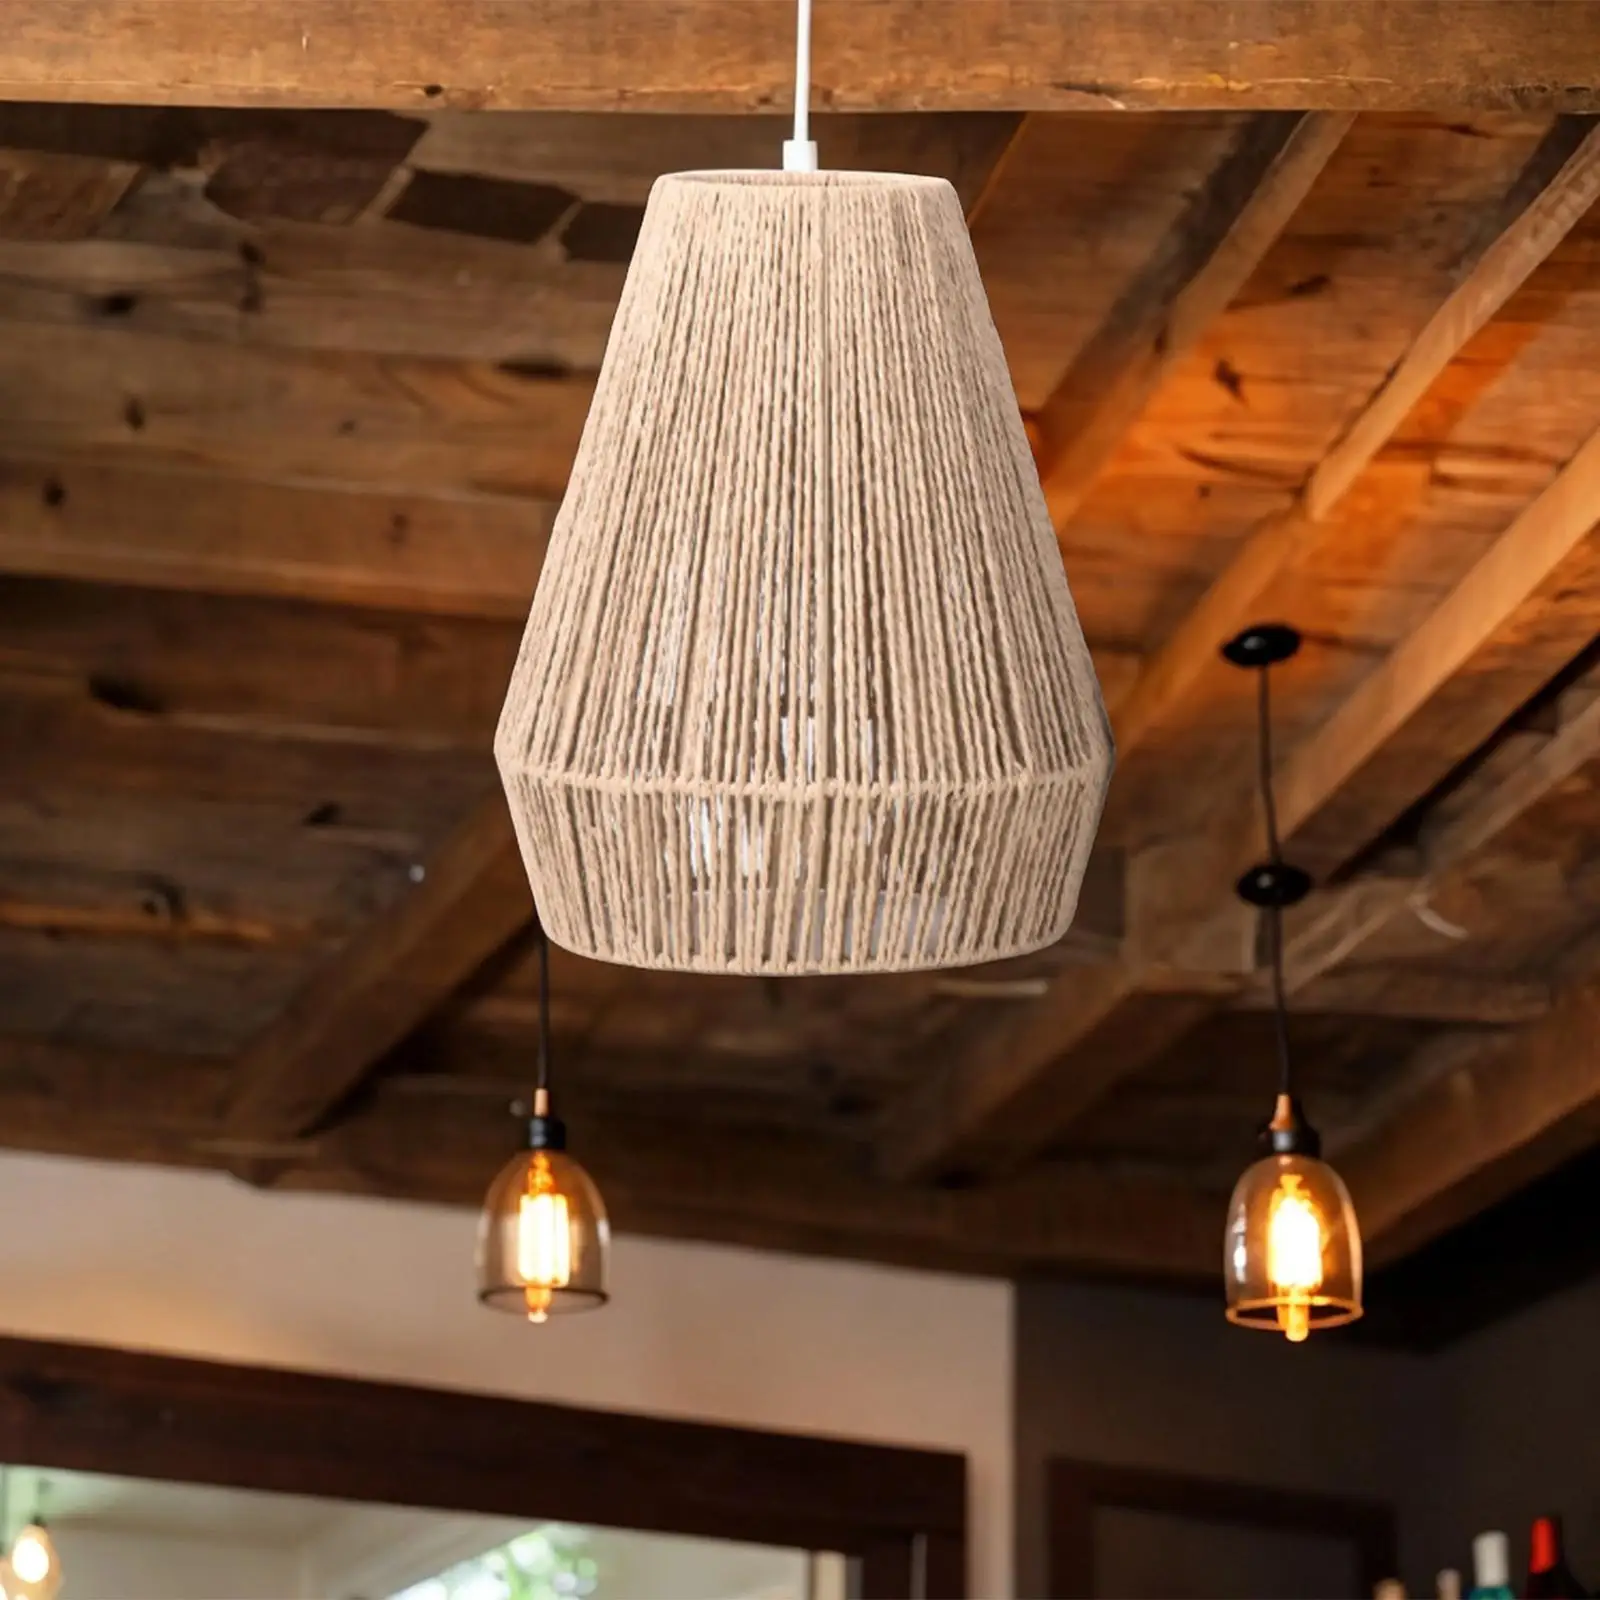 Hanging Lamp Shade Handmade DIY Lighting Fixtures Rope Woven Lampshade for Farmhouse Bedroom Living Room Dining Table Hotel